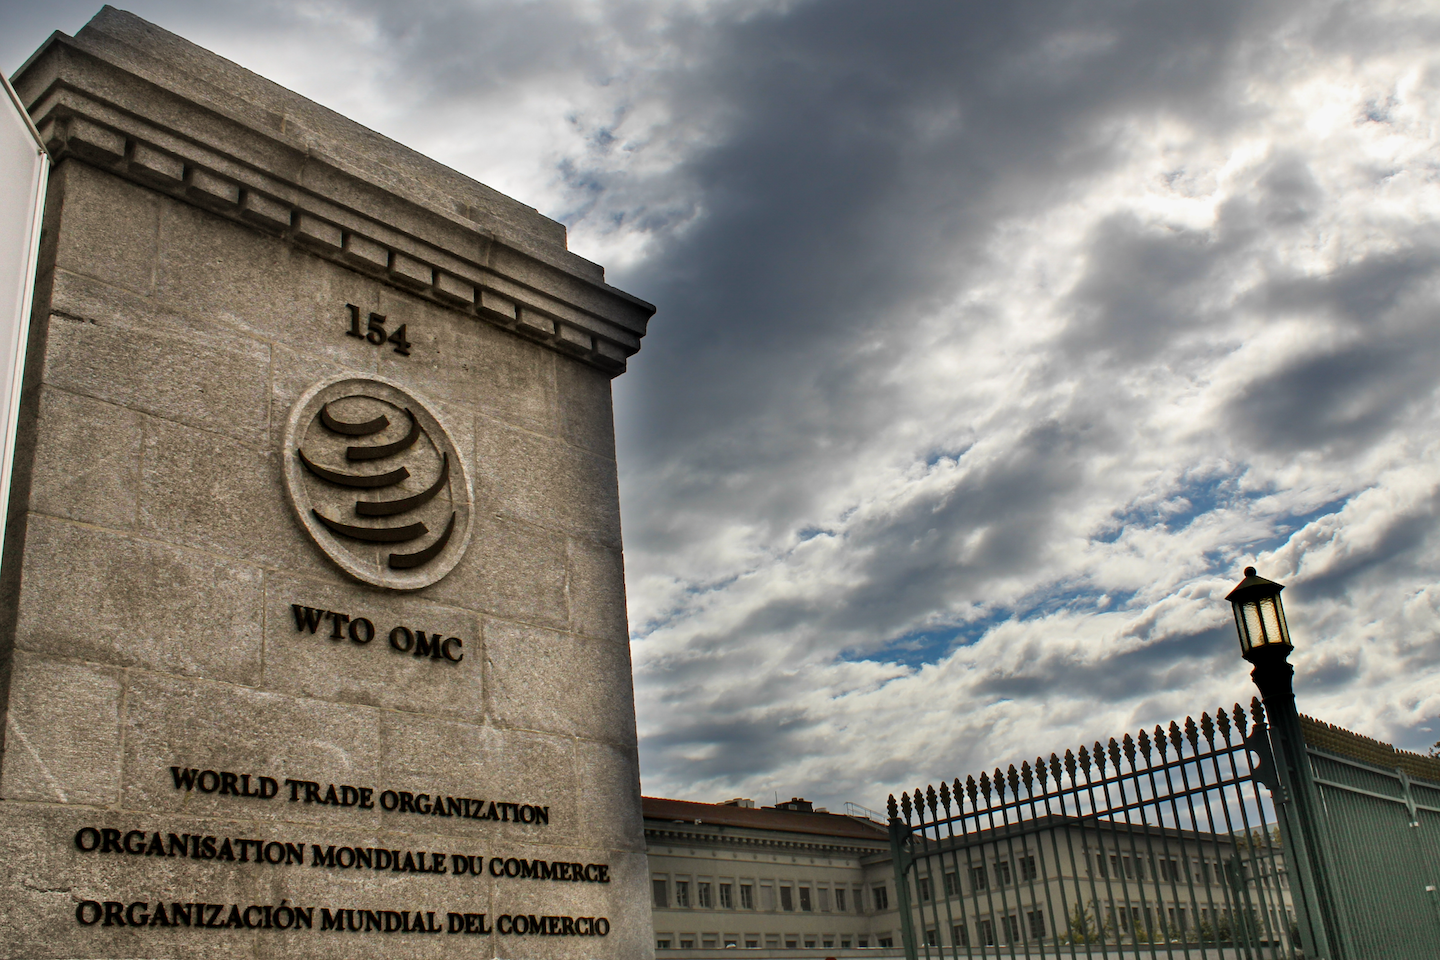 U.S. Trade Policy: Going it Alone vs. Abiding by the World Trade Organization